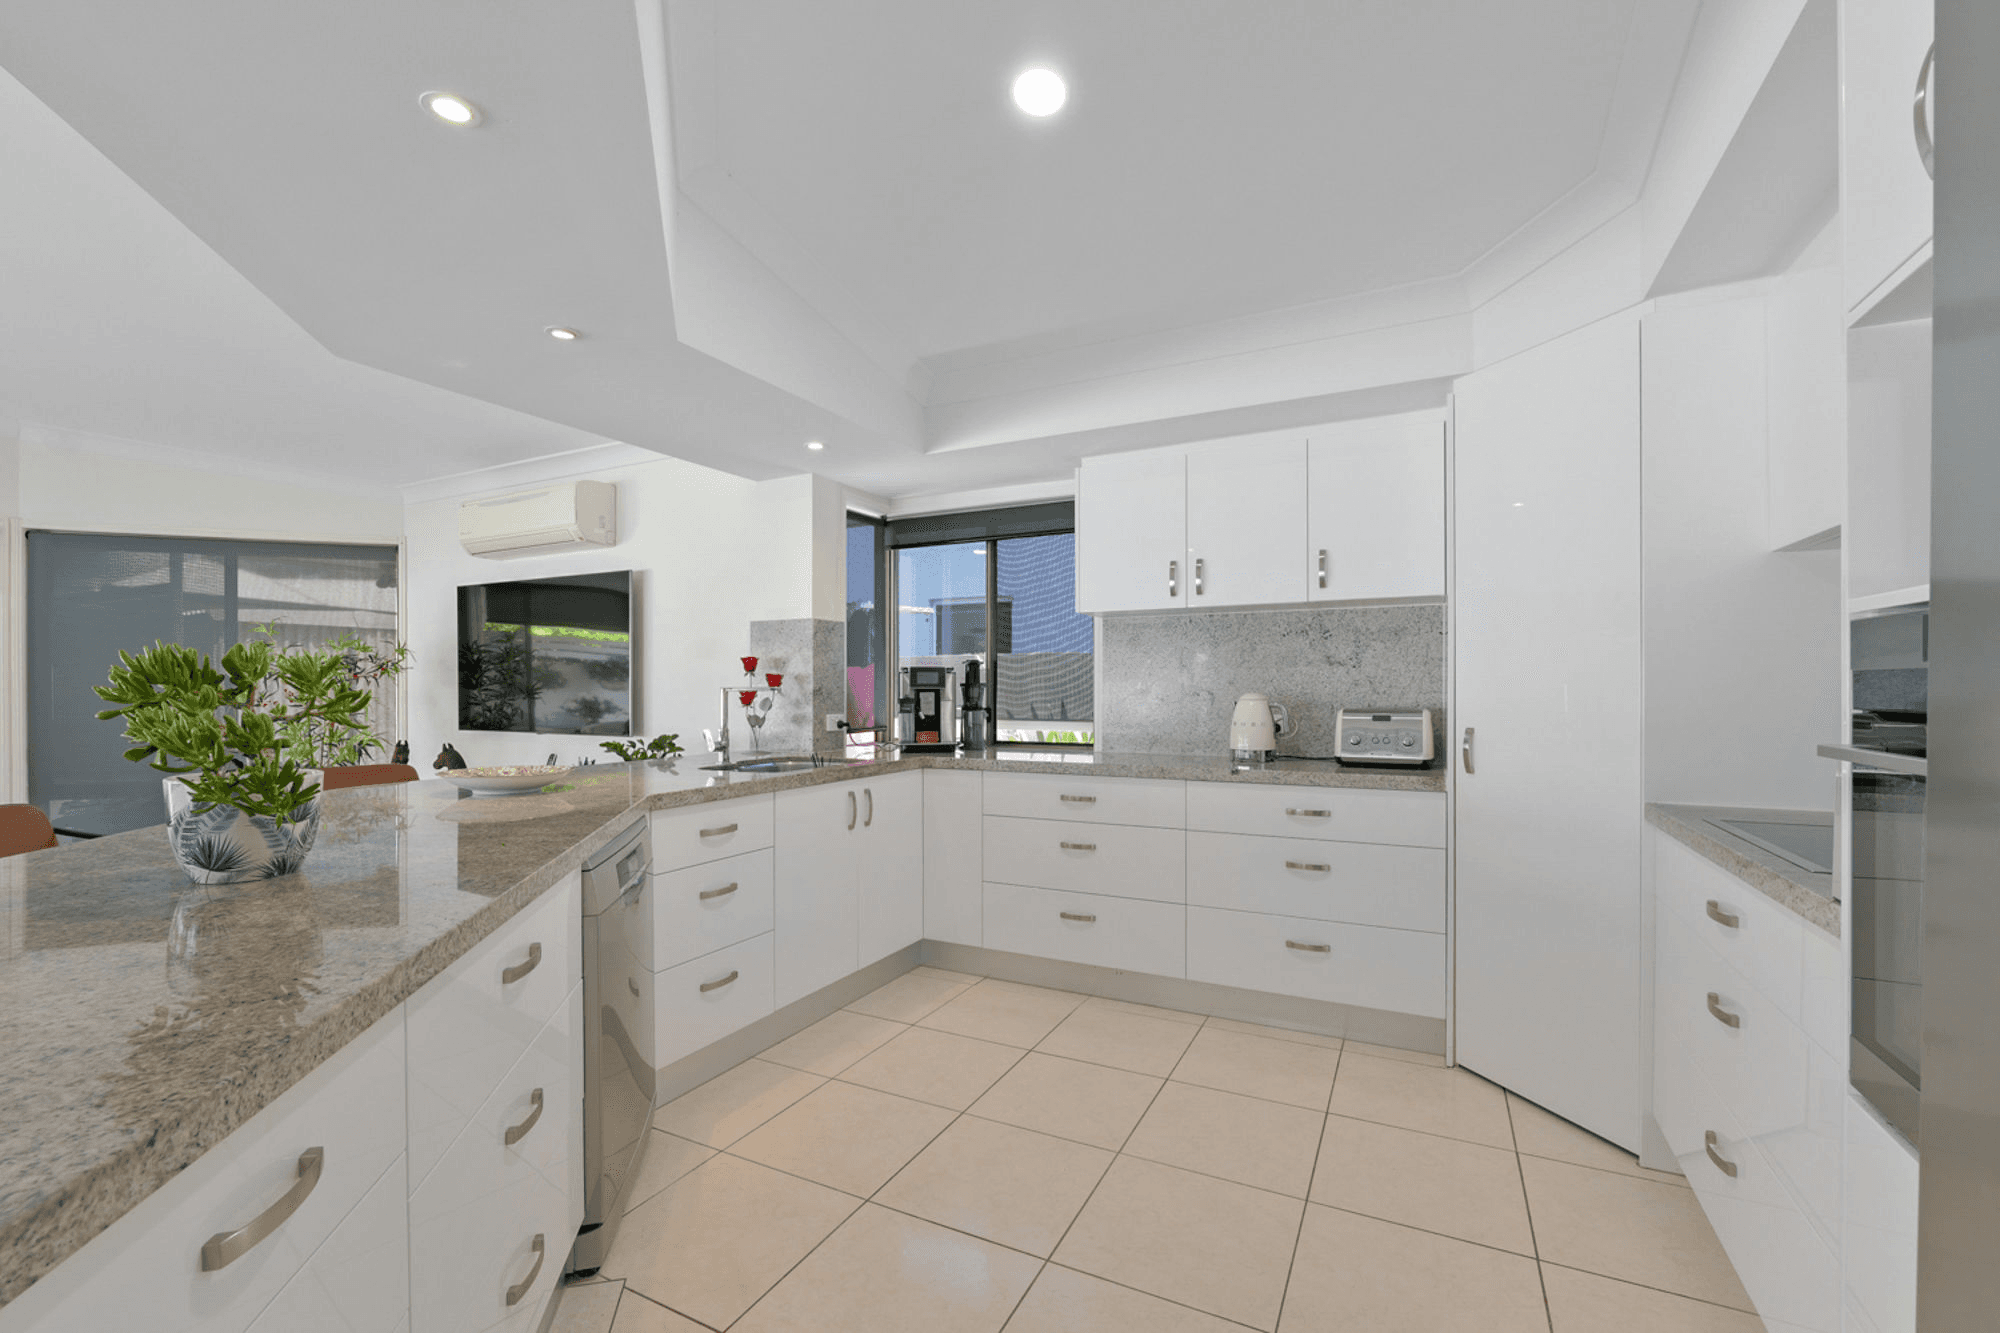 5 Campbellville Circuit, PELICAN WATERS, QLD 4551